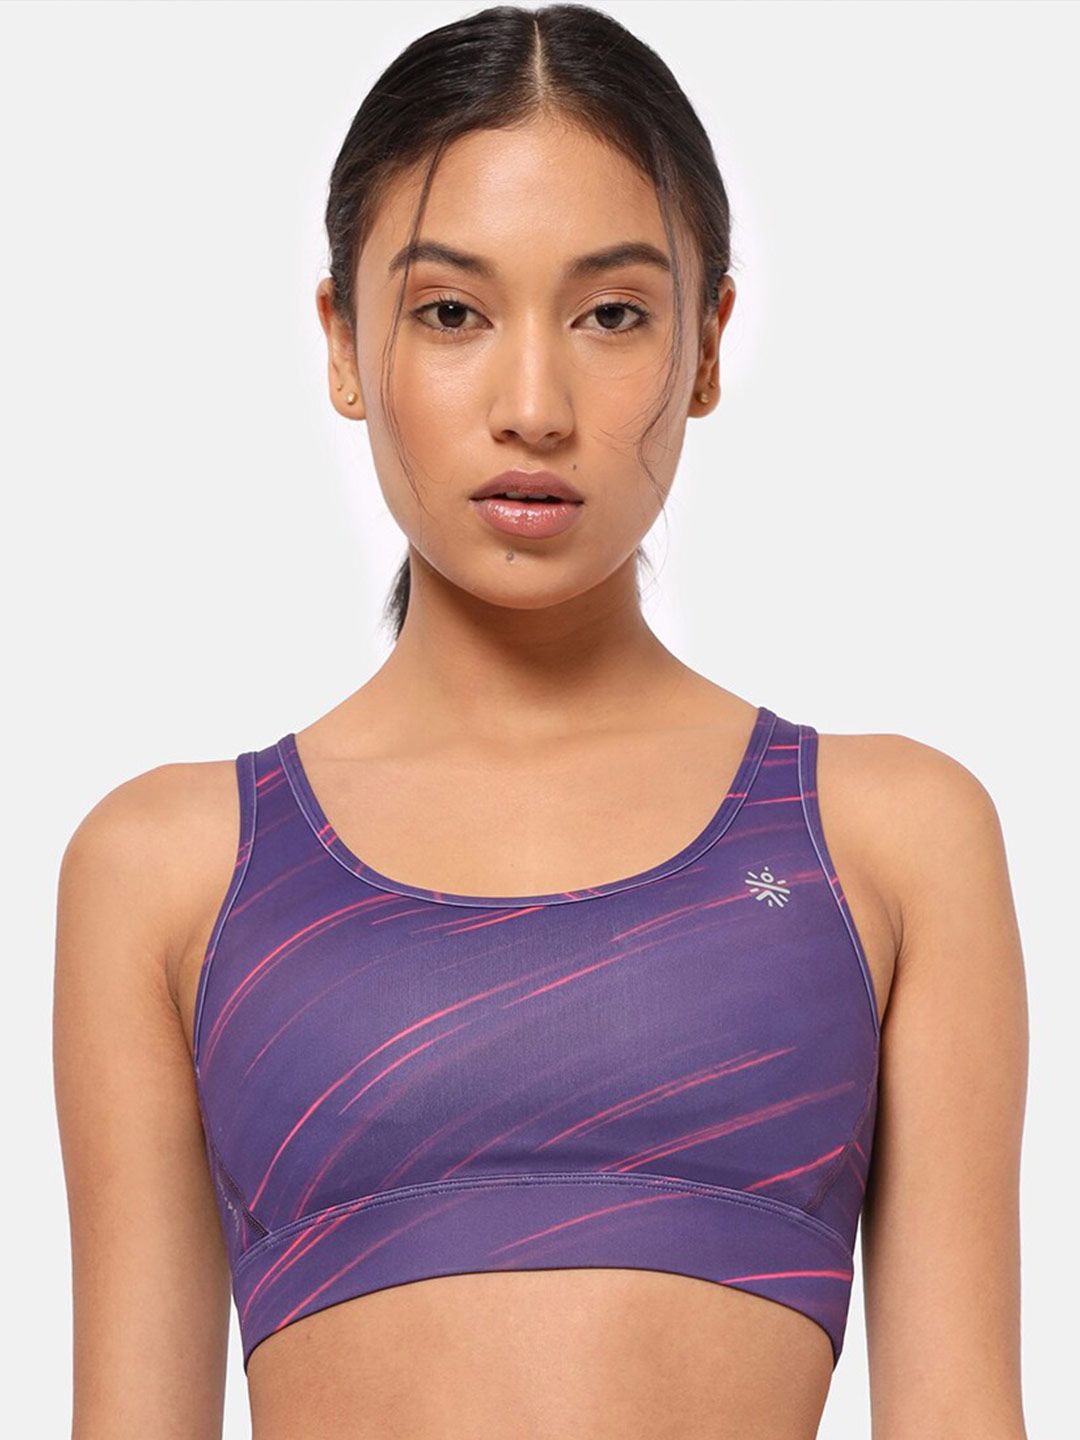 Cultsport Purple & Pink Abstract Workout Bra 601051 Price in India